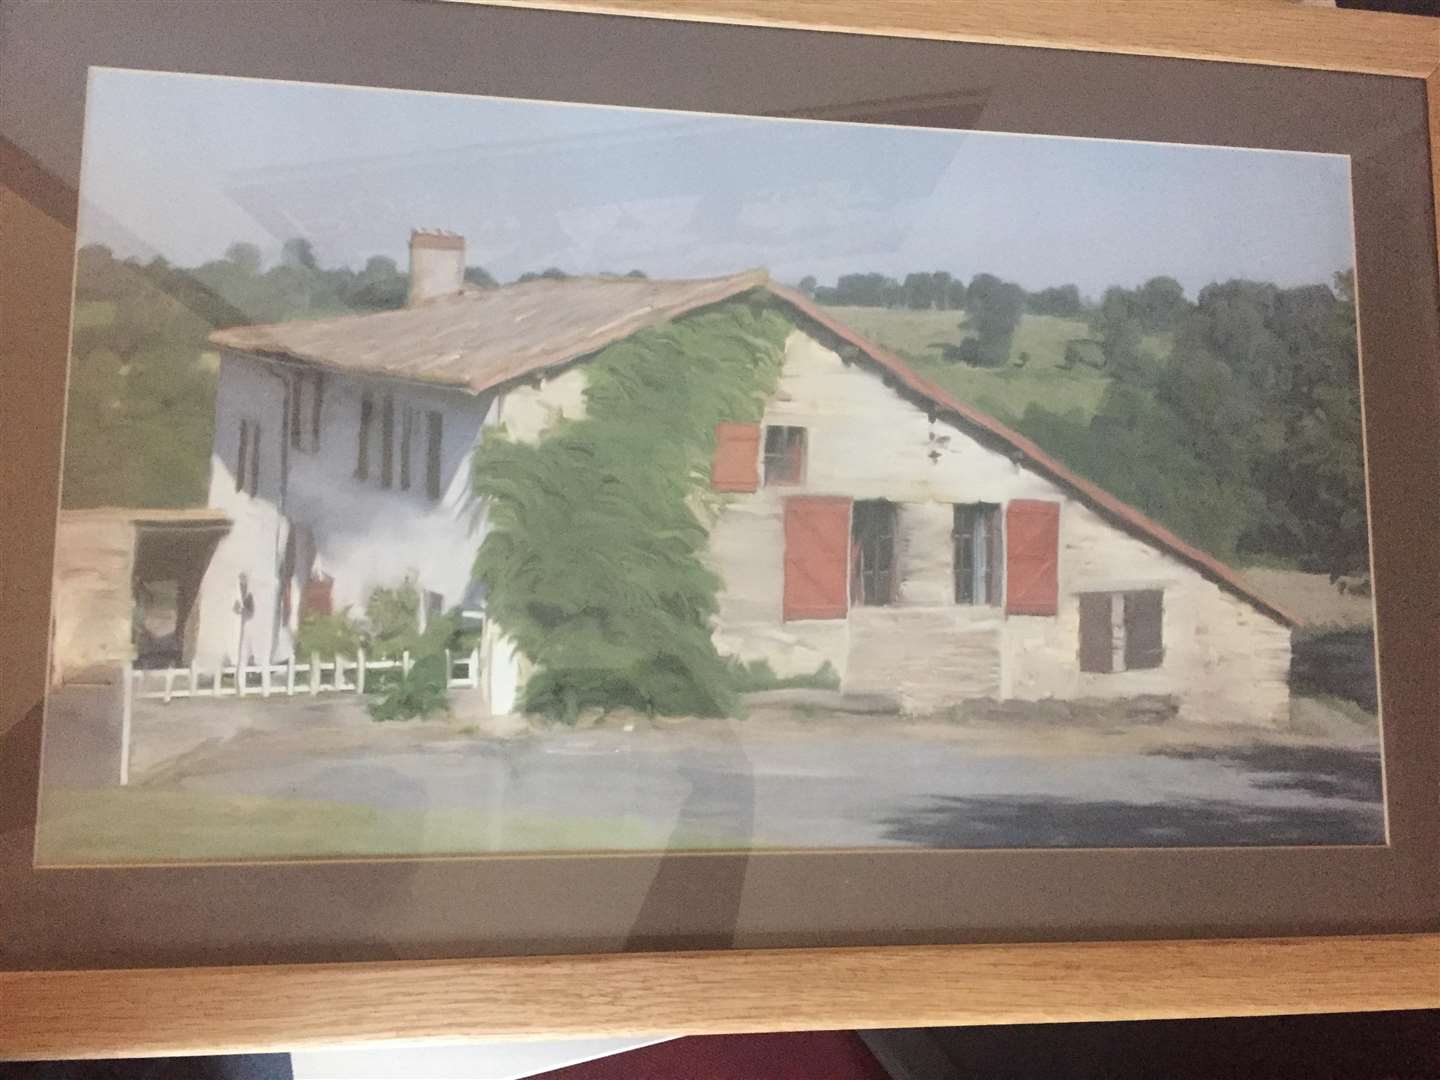 The Laws' French farmhouse